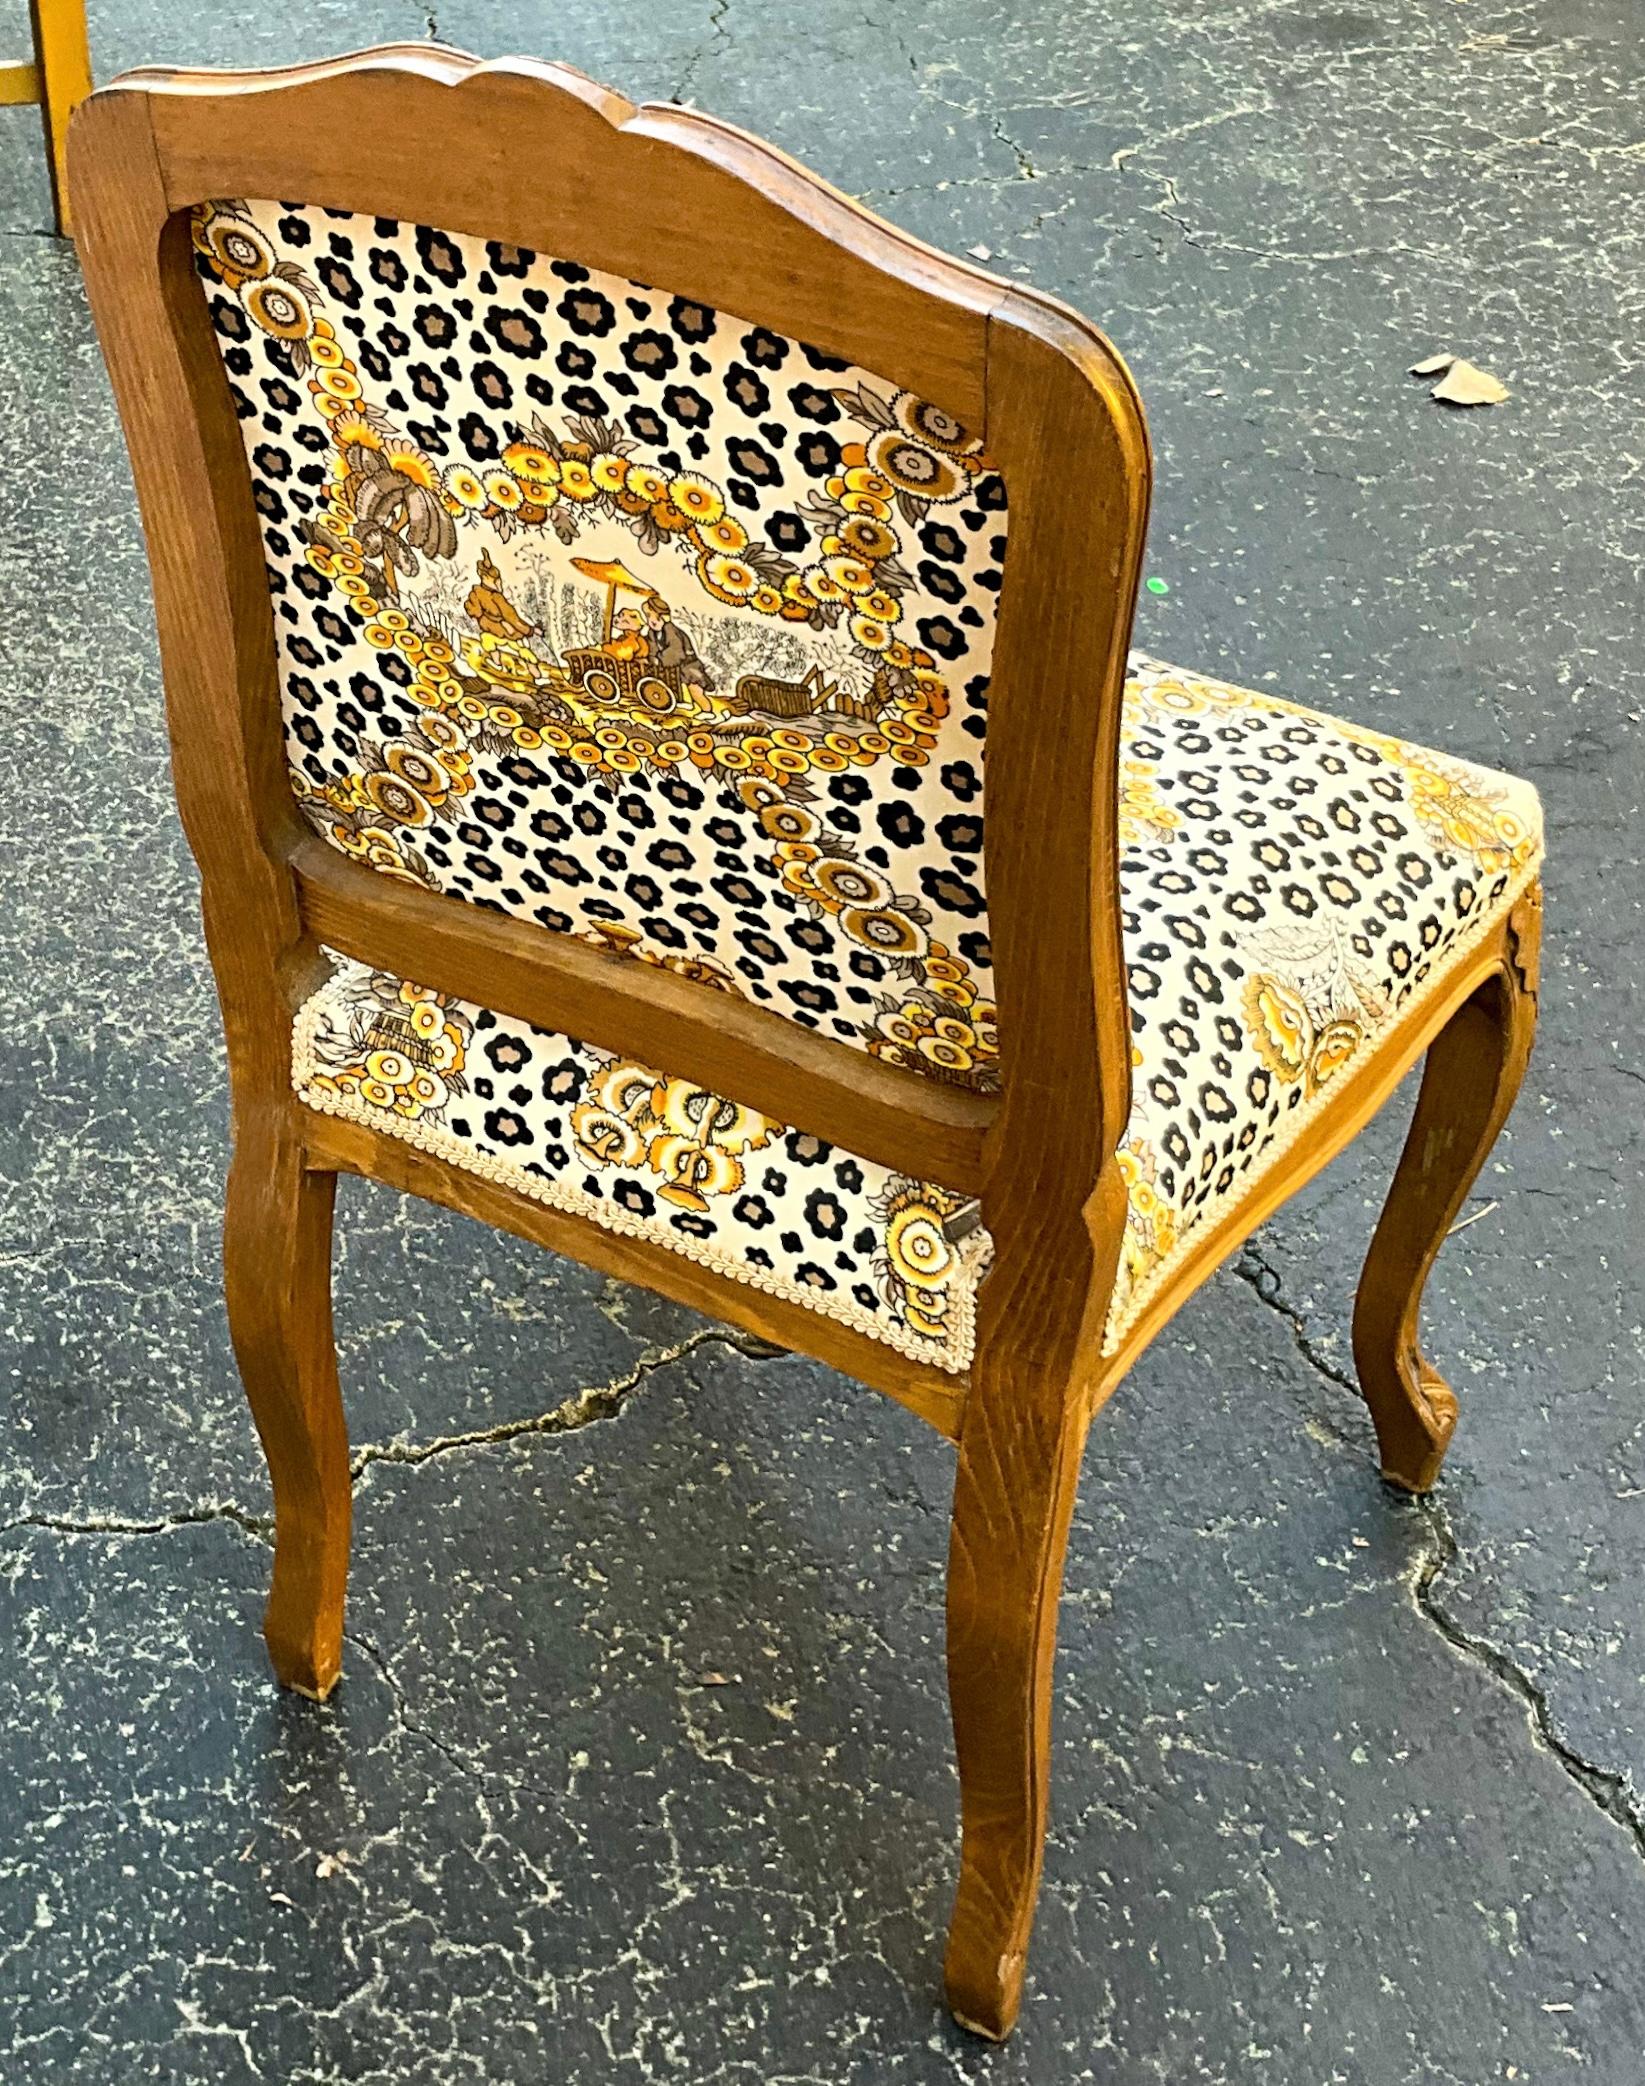 This is a carved French side chair that was upholstered in a 1970s Brunschwig & Fils leopard chinoiserie. It is in very good vintage condition.